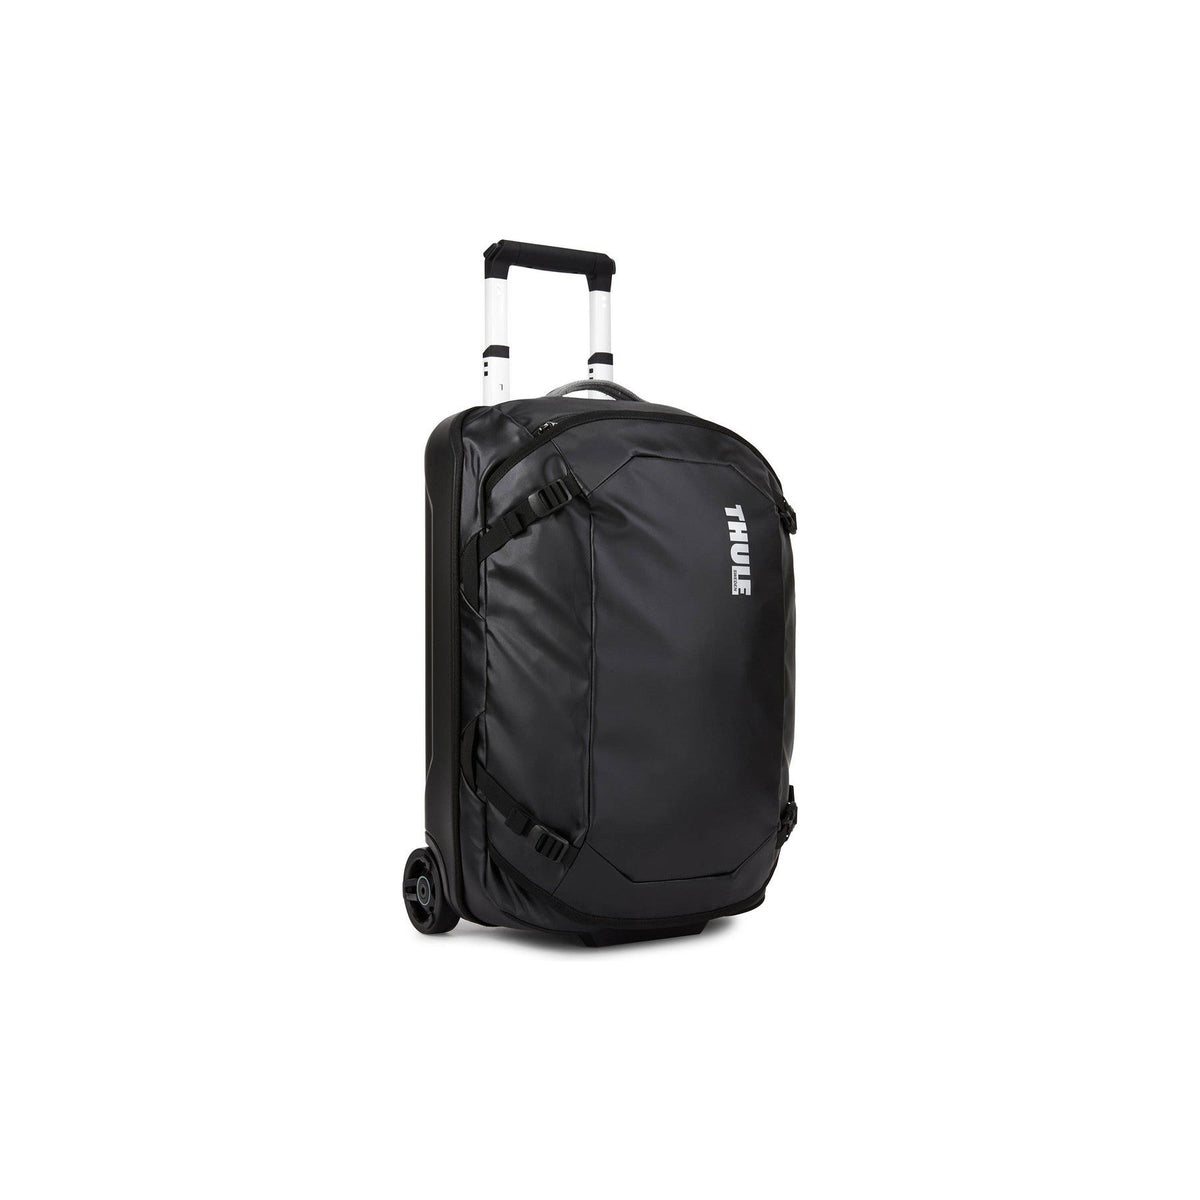 Thule Chasm Carry On Luggage